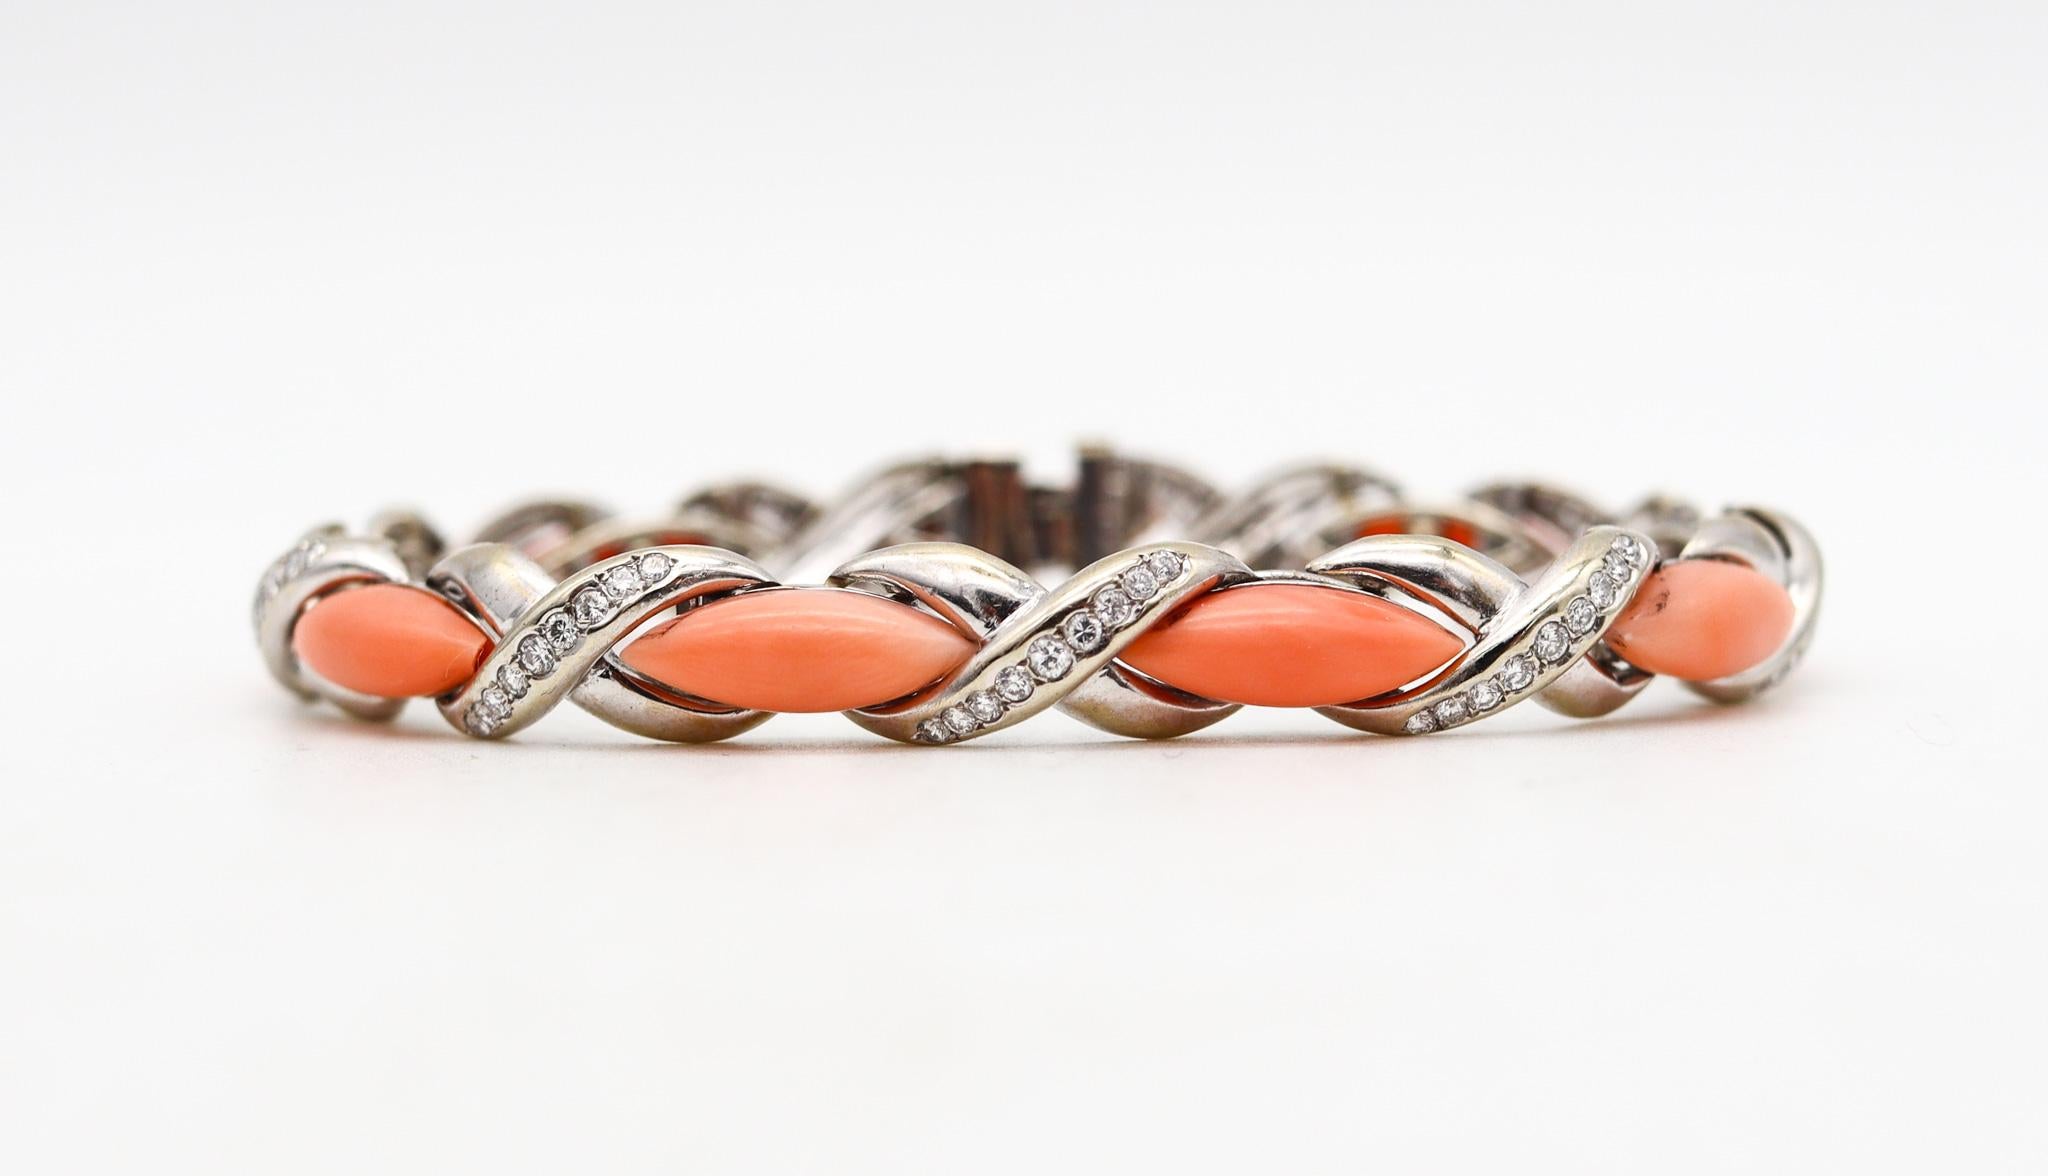 Beautiful coral bracelet designed by Cartier.

A very elegant bracelet, created by the Parisian jewelry house of Cartier in the late 1960. This bracelet was crafted in solid white gold of 18 karats with high polished finish. Exceptional craftmanship